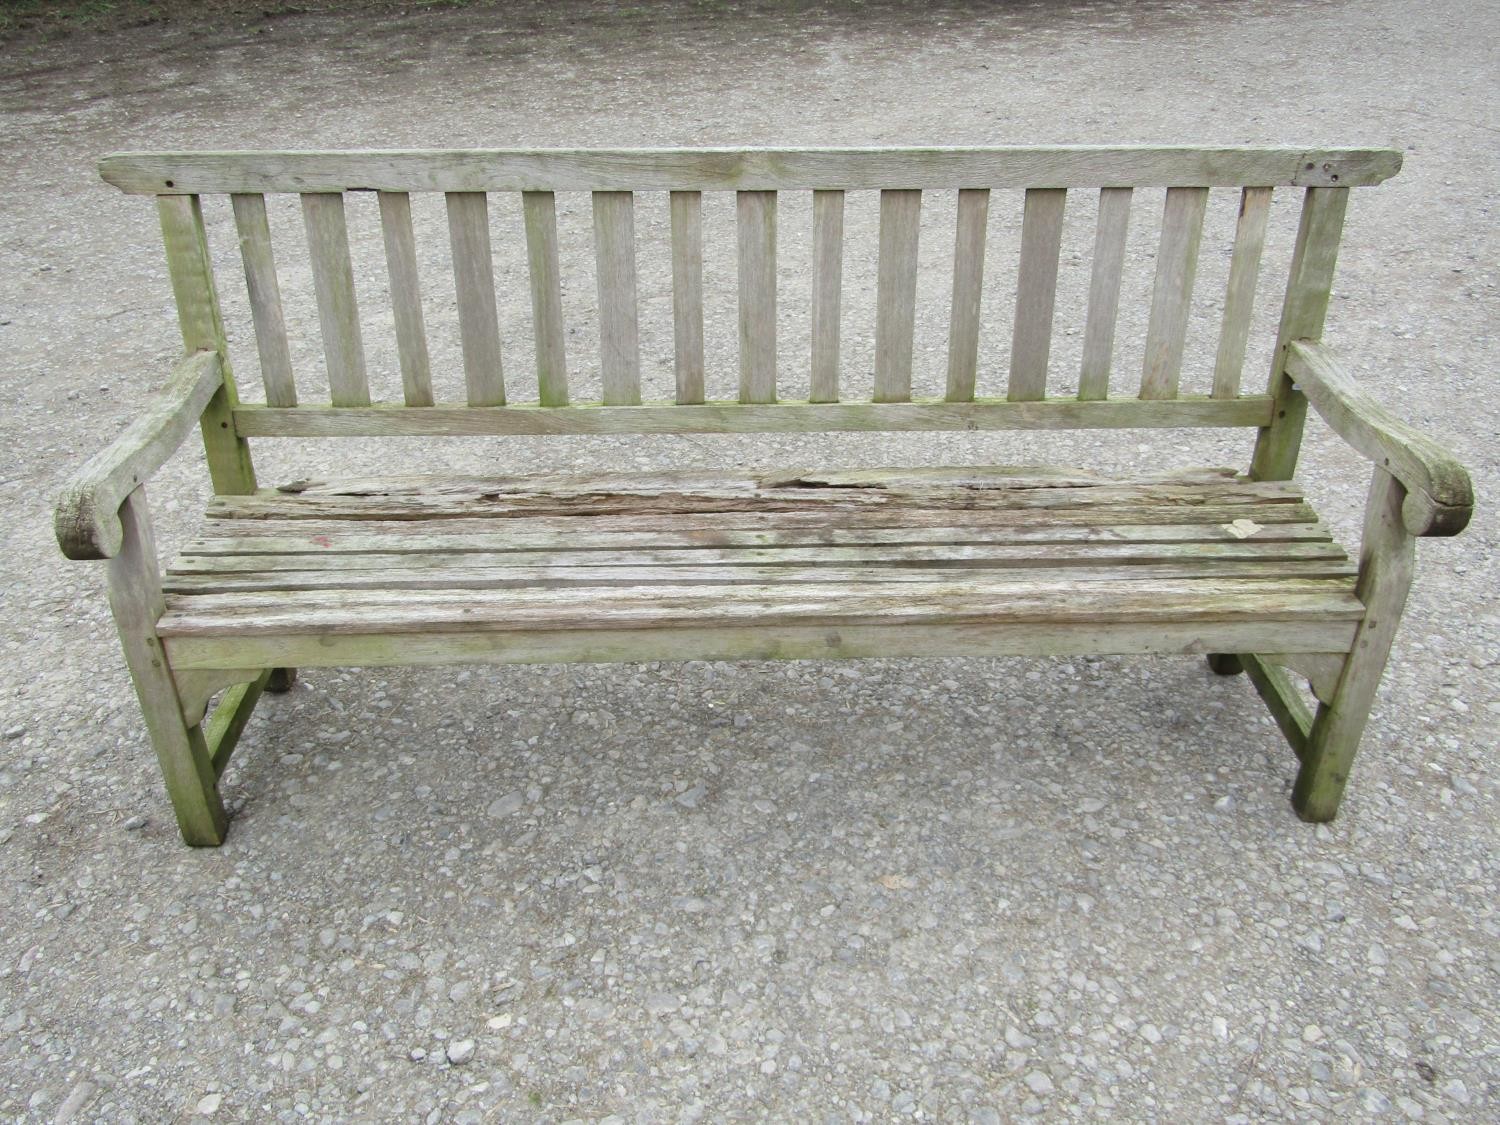 A well weathered teak garden bench with slatted seat and back and open scrolled arms, 198 cm long (